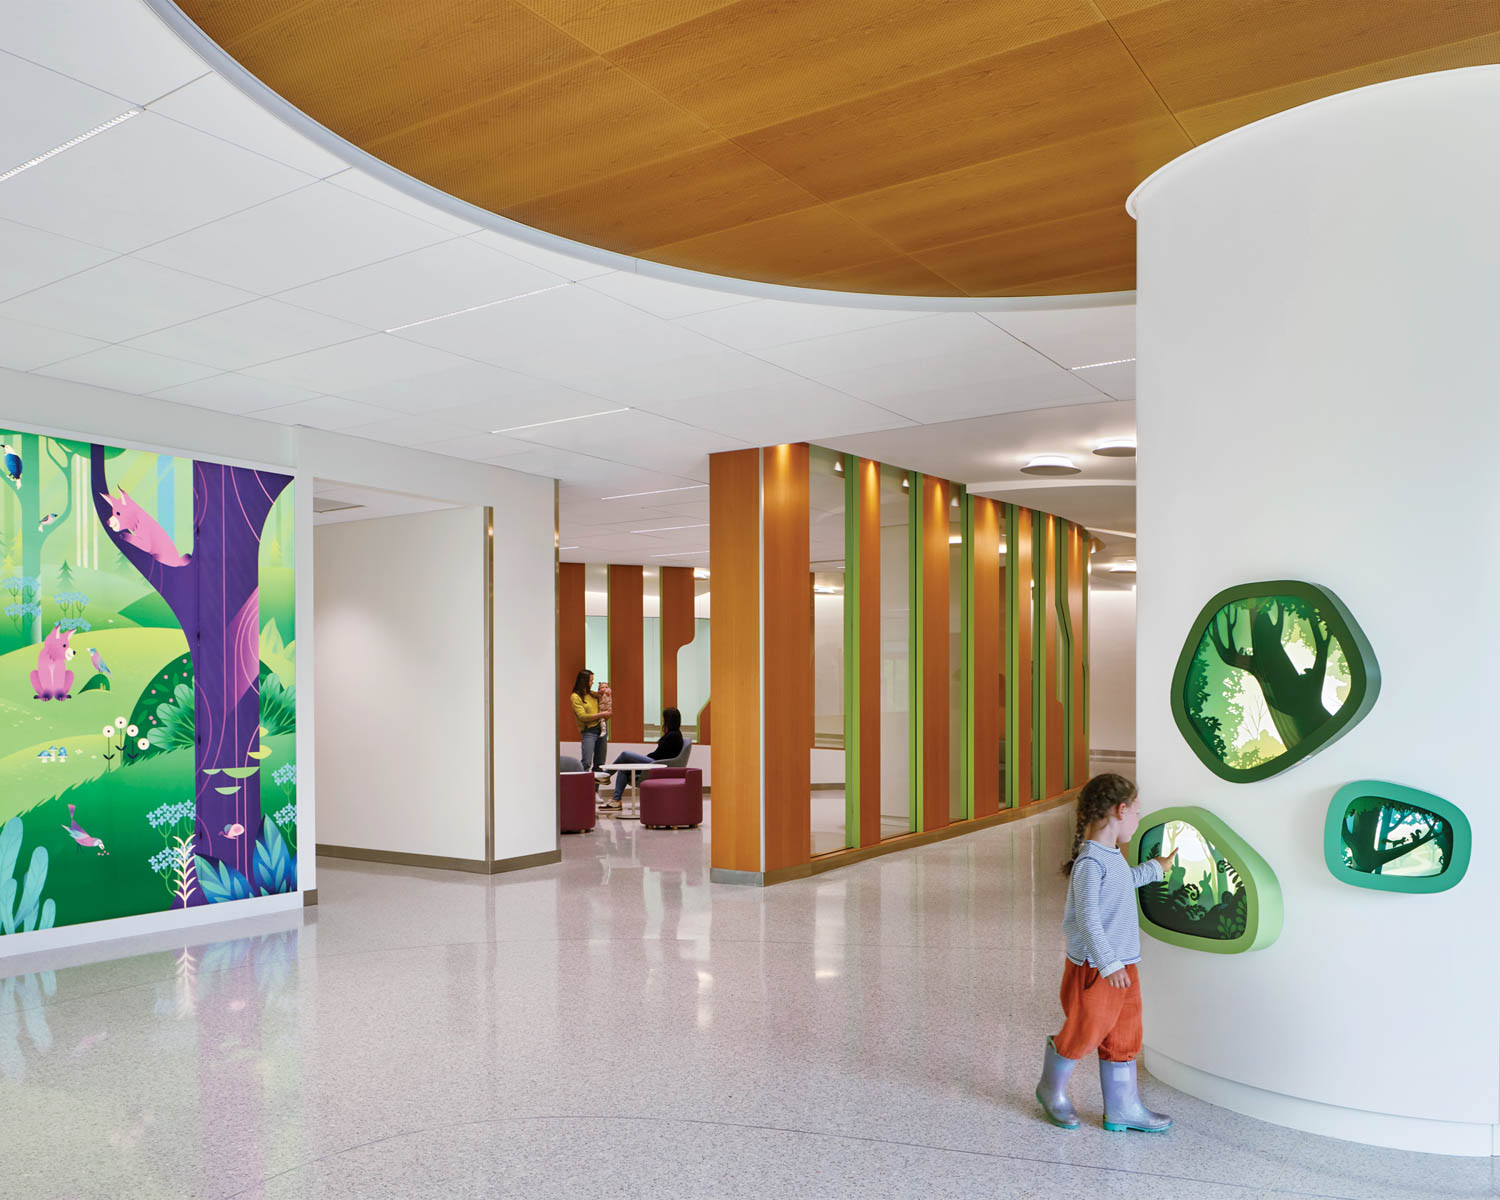 Children follow storybook wayfinding images in Building Care, Seattle Children’s.